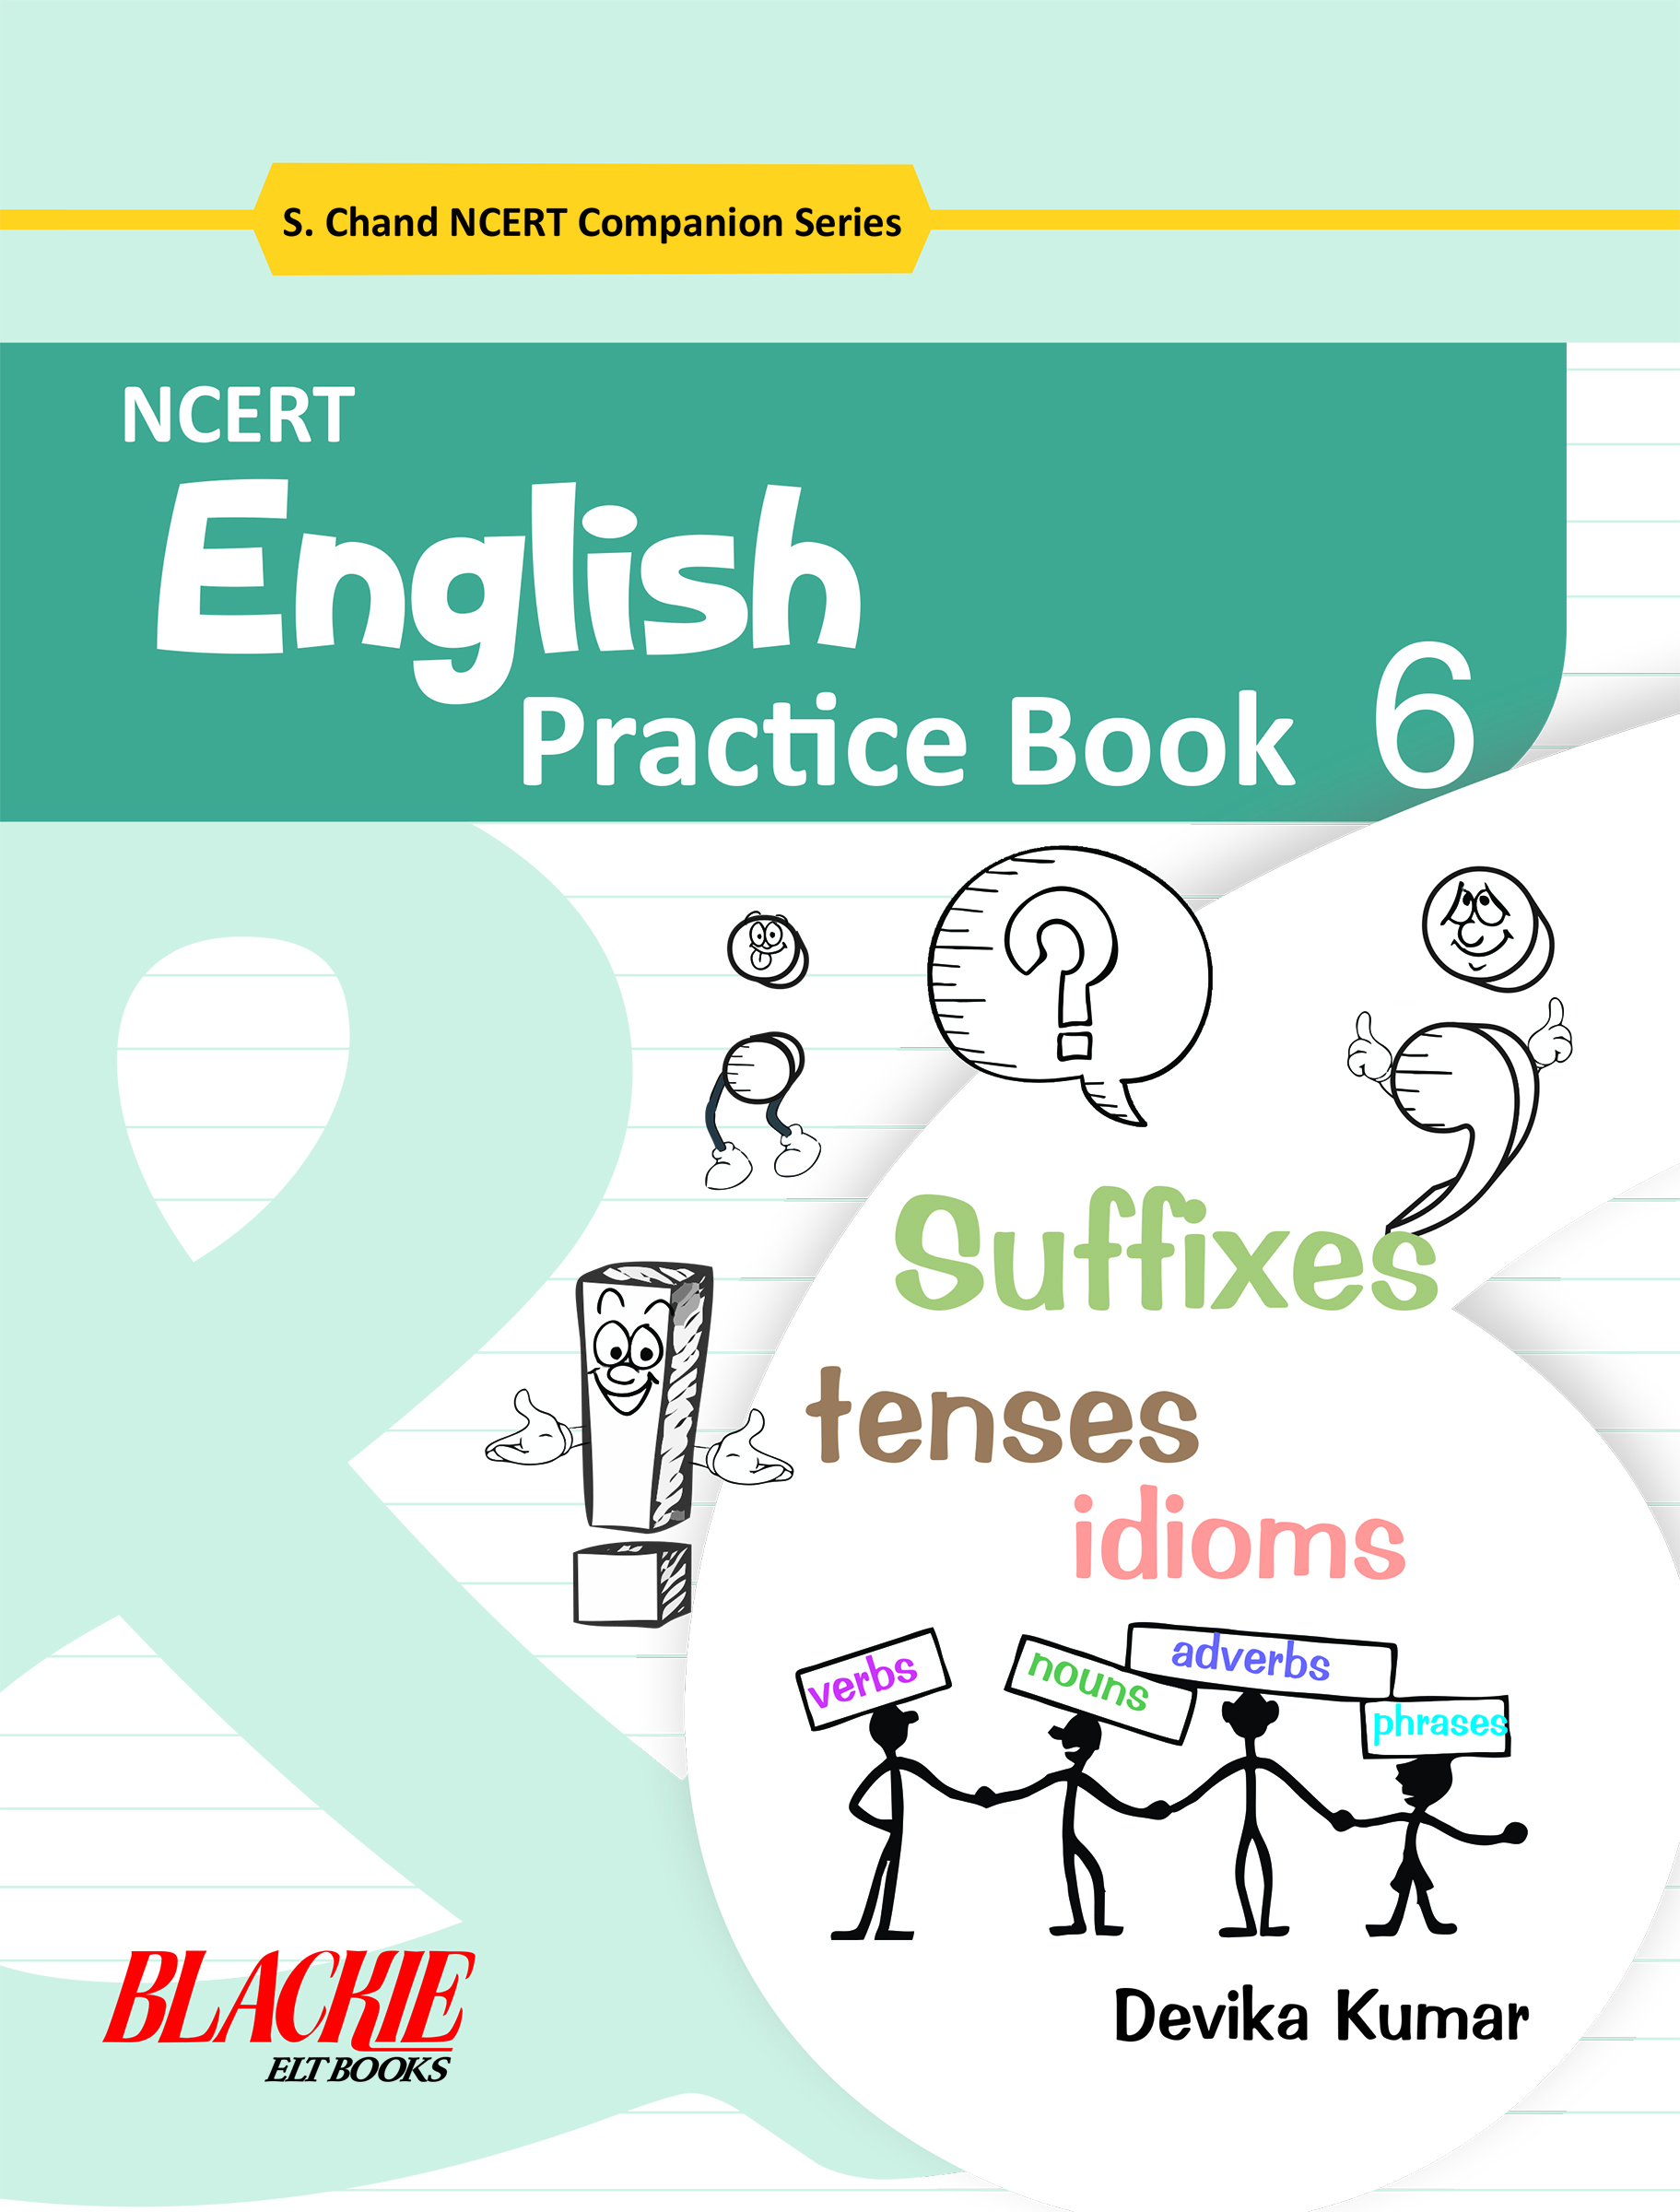 book review of ncert english book